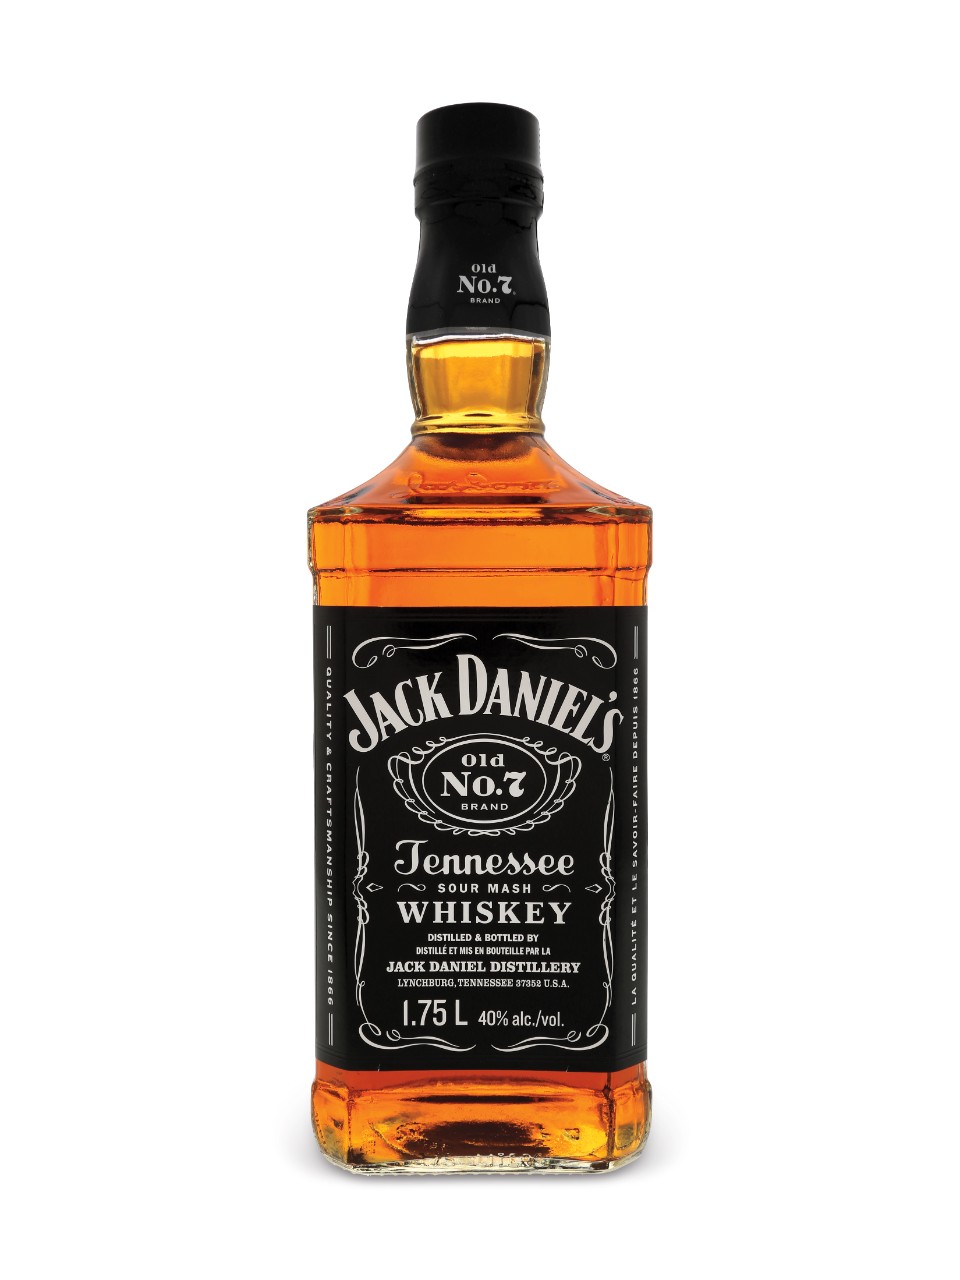 Jack Daniel's Tennessee Whiskey
